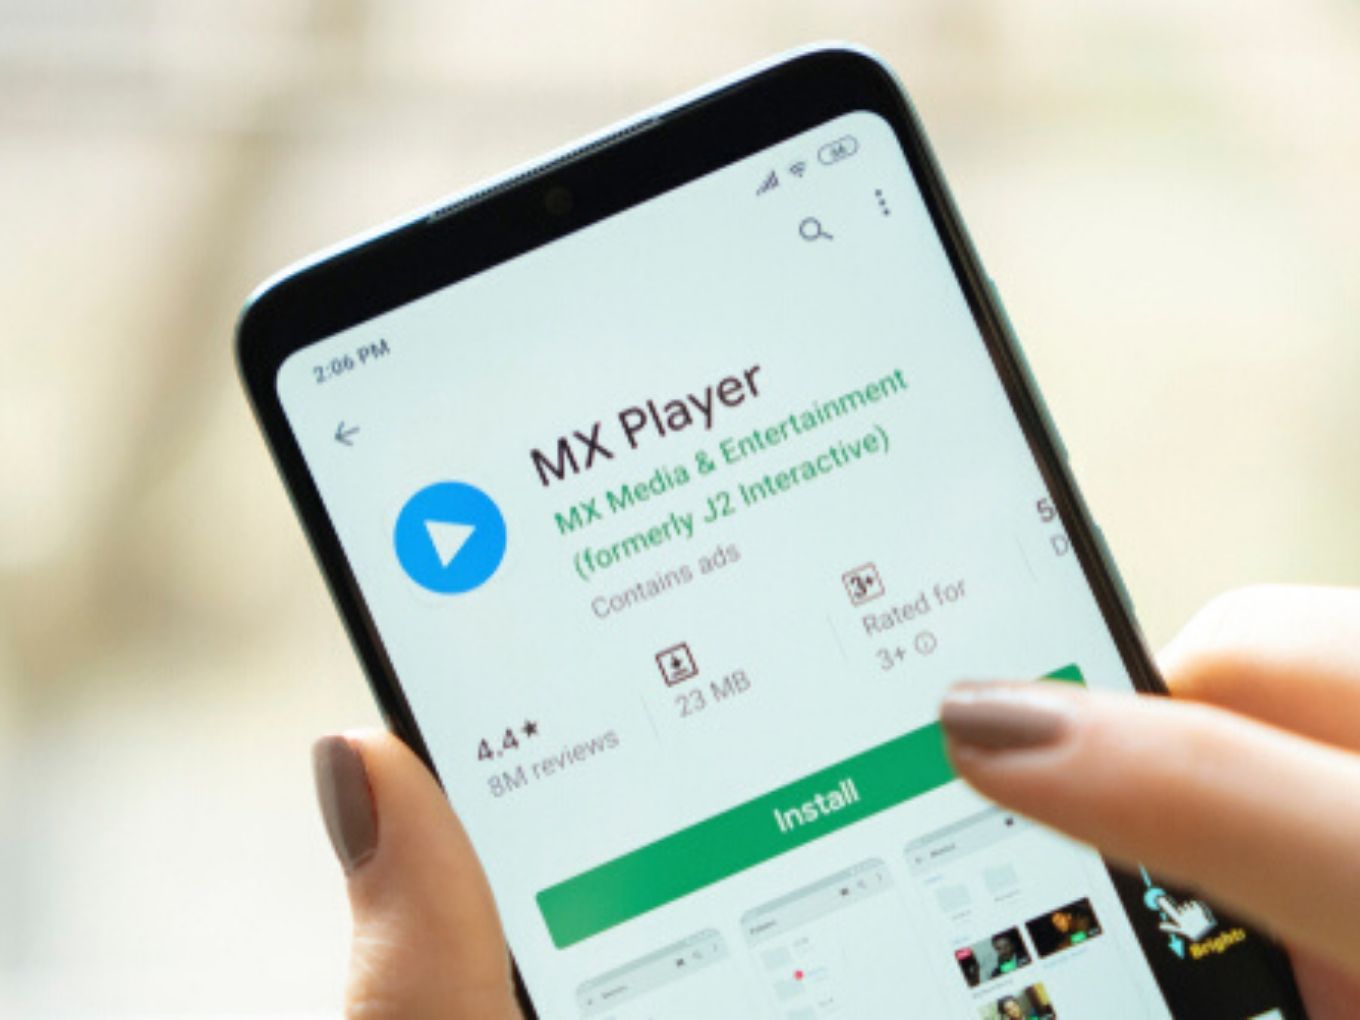 MX Player Launches Games To Increase User Engagement - OTT Platforms India